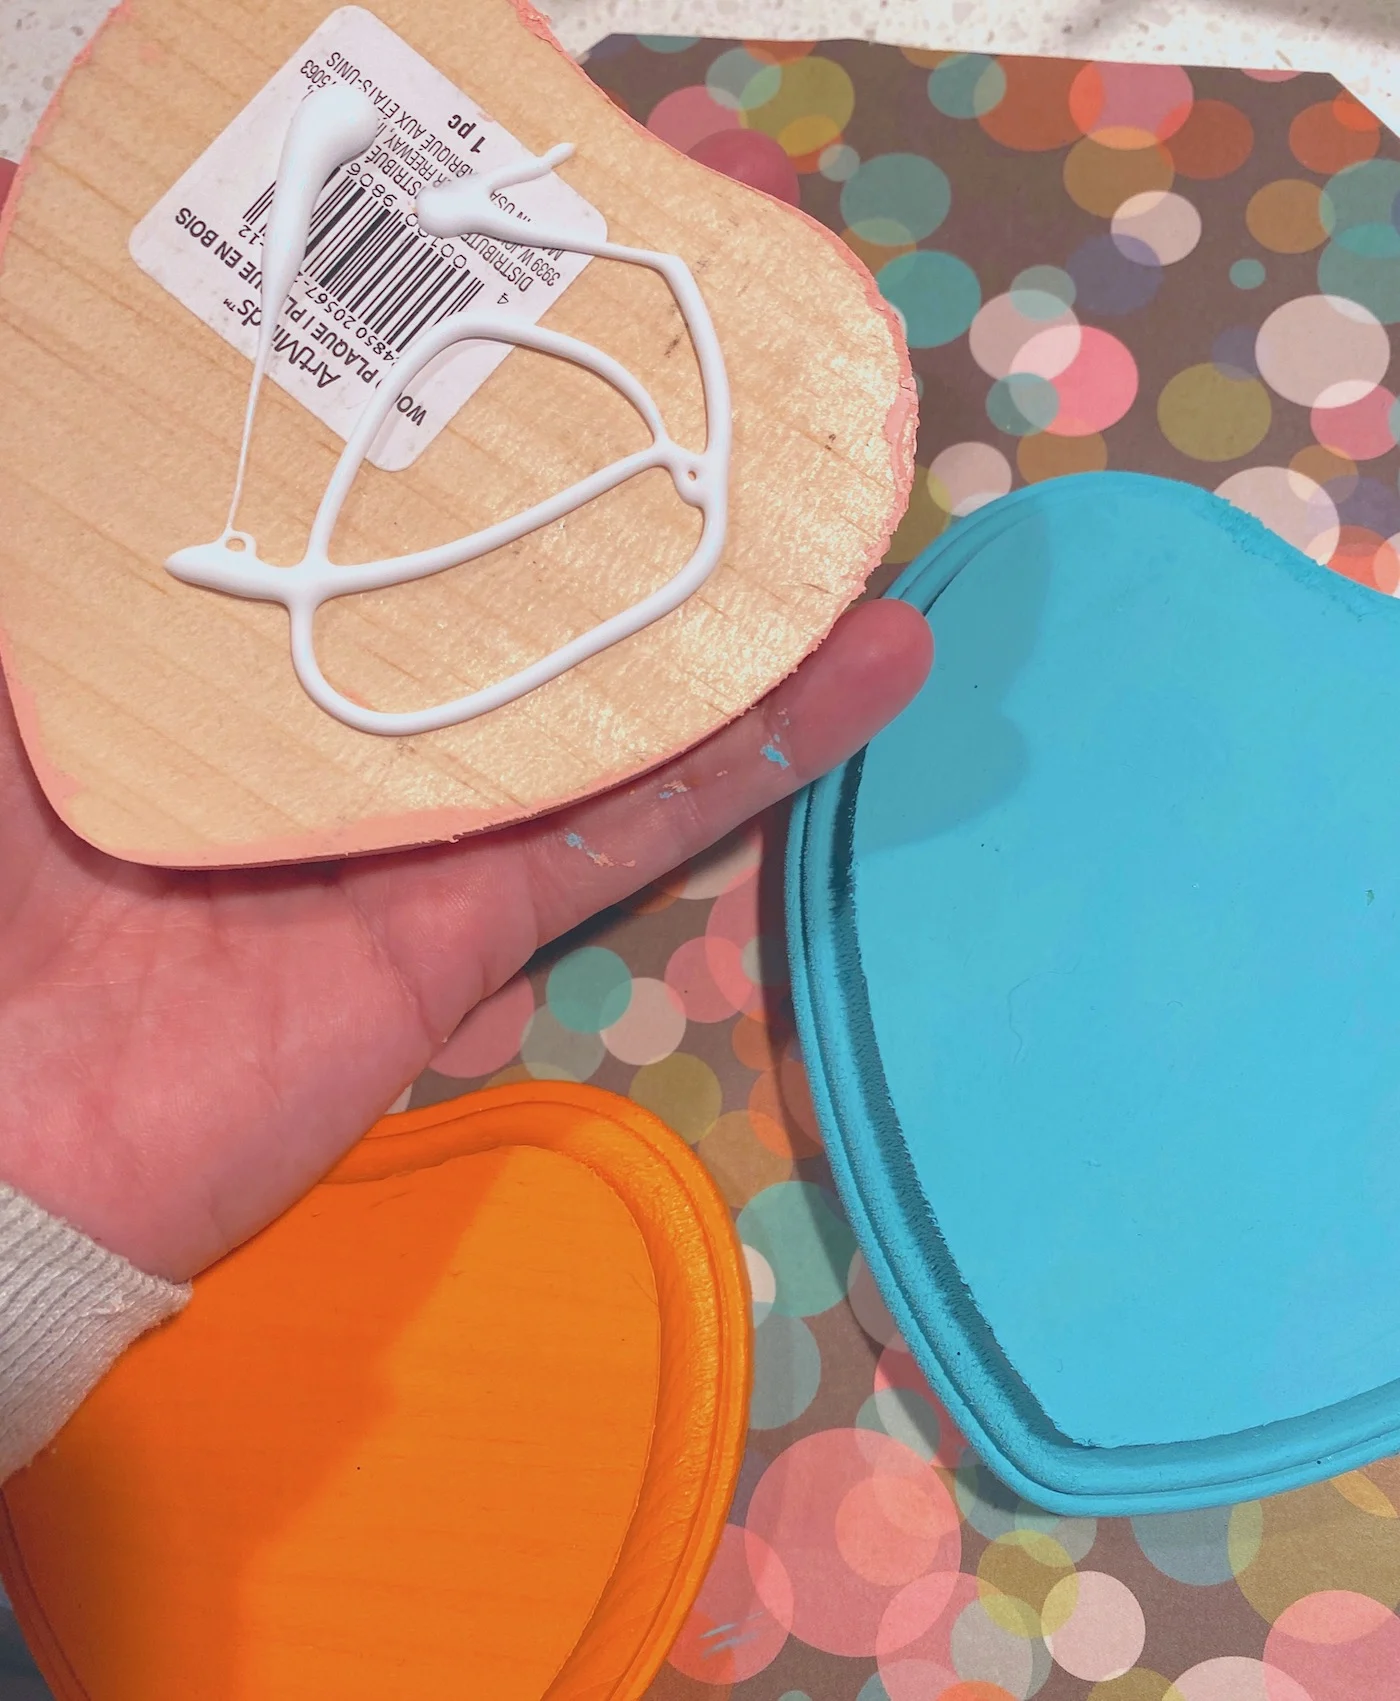 Gluing the wood hearts to the plaque with craft glue